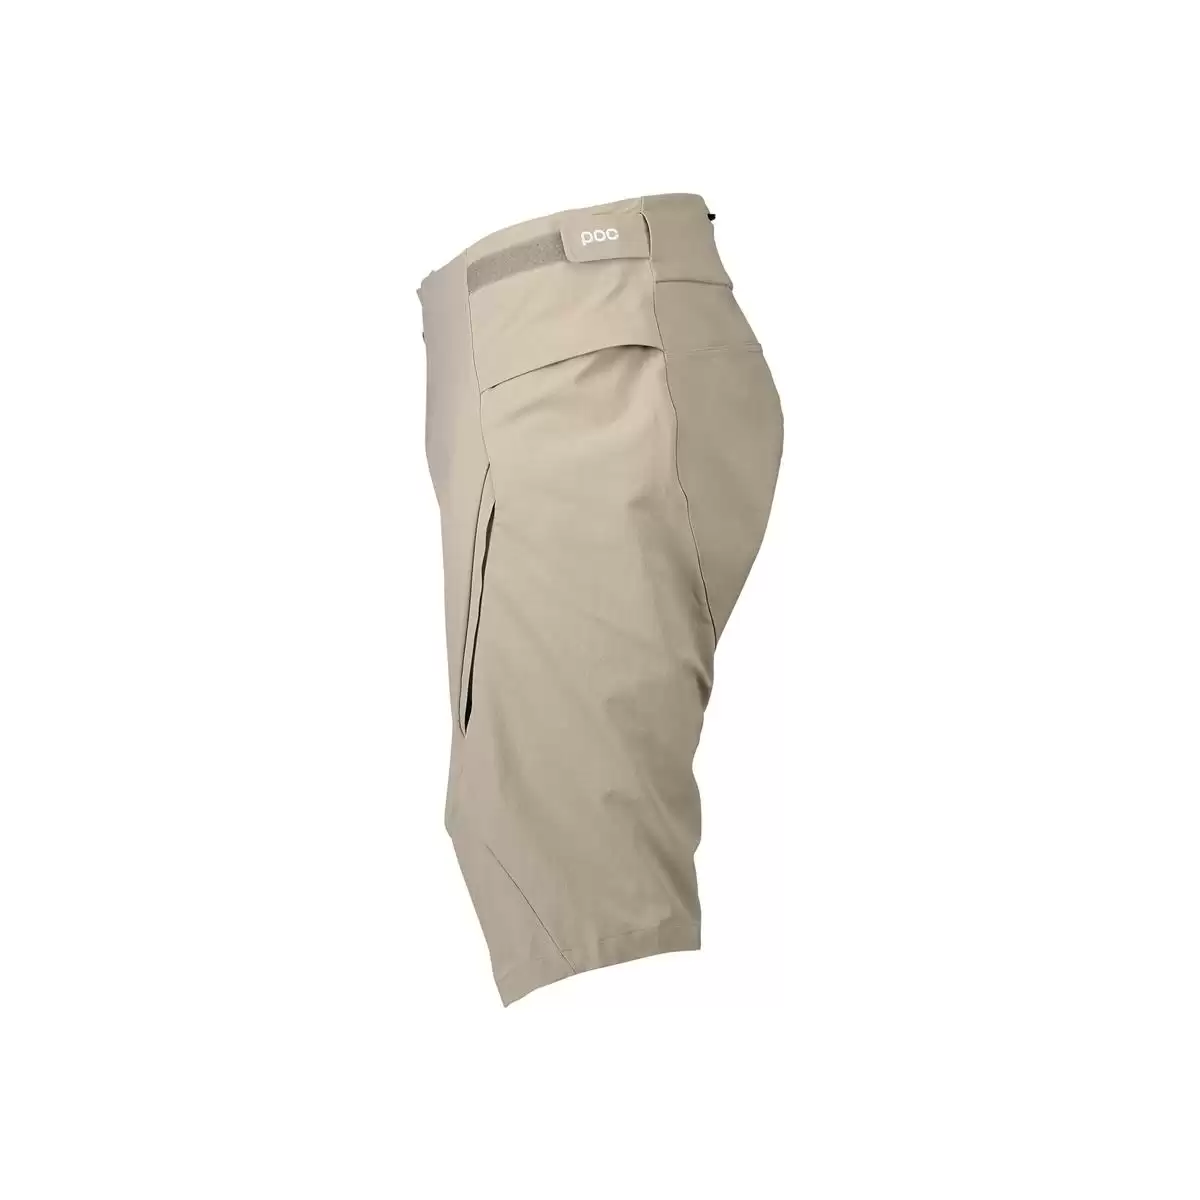 M's Infinite All-mountain shorts Moonstone Grey size S #1